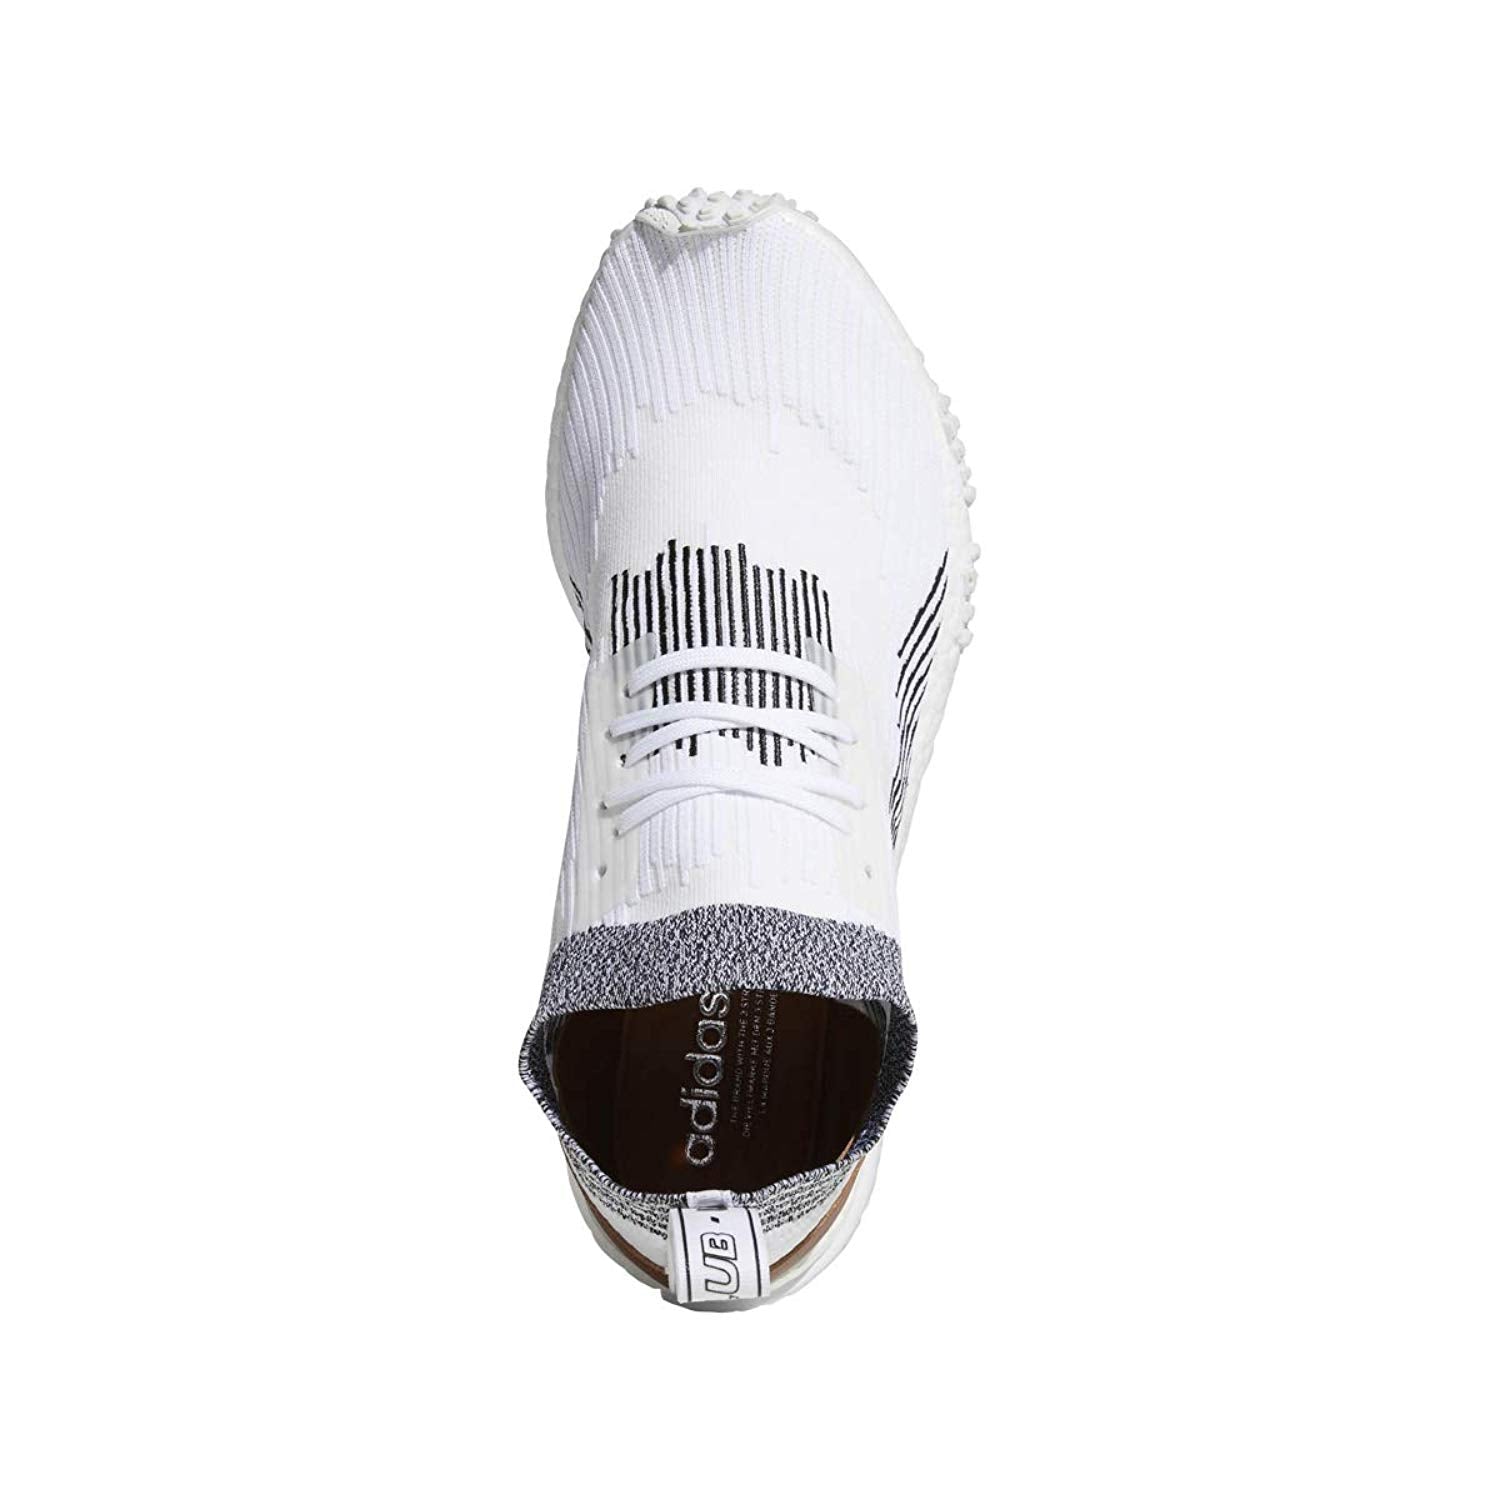 Adidas Mens NMD_Racer Casual Shoes